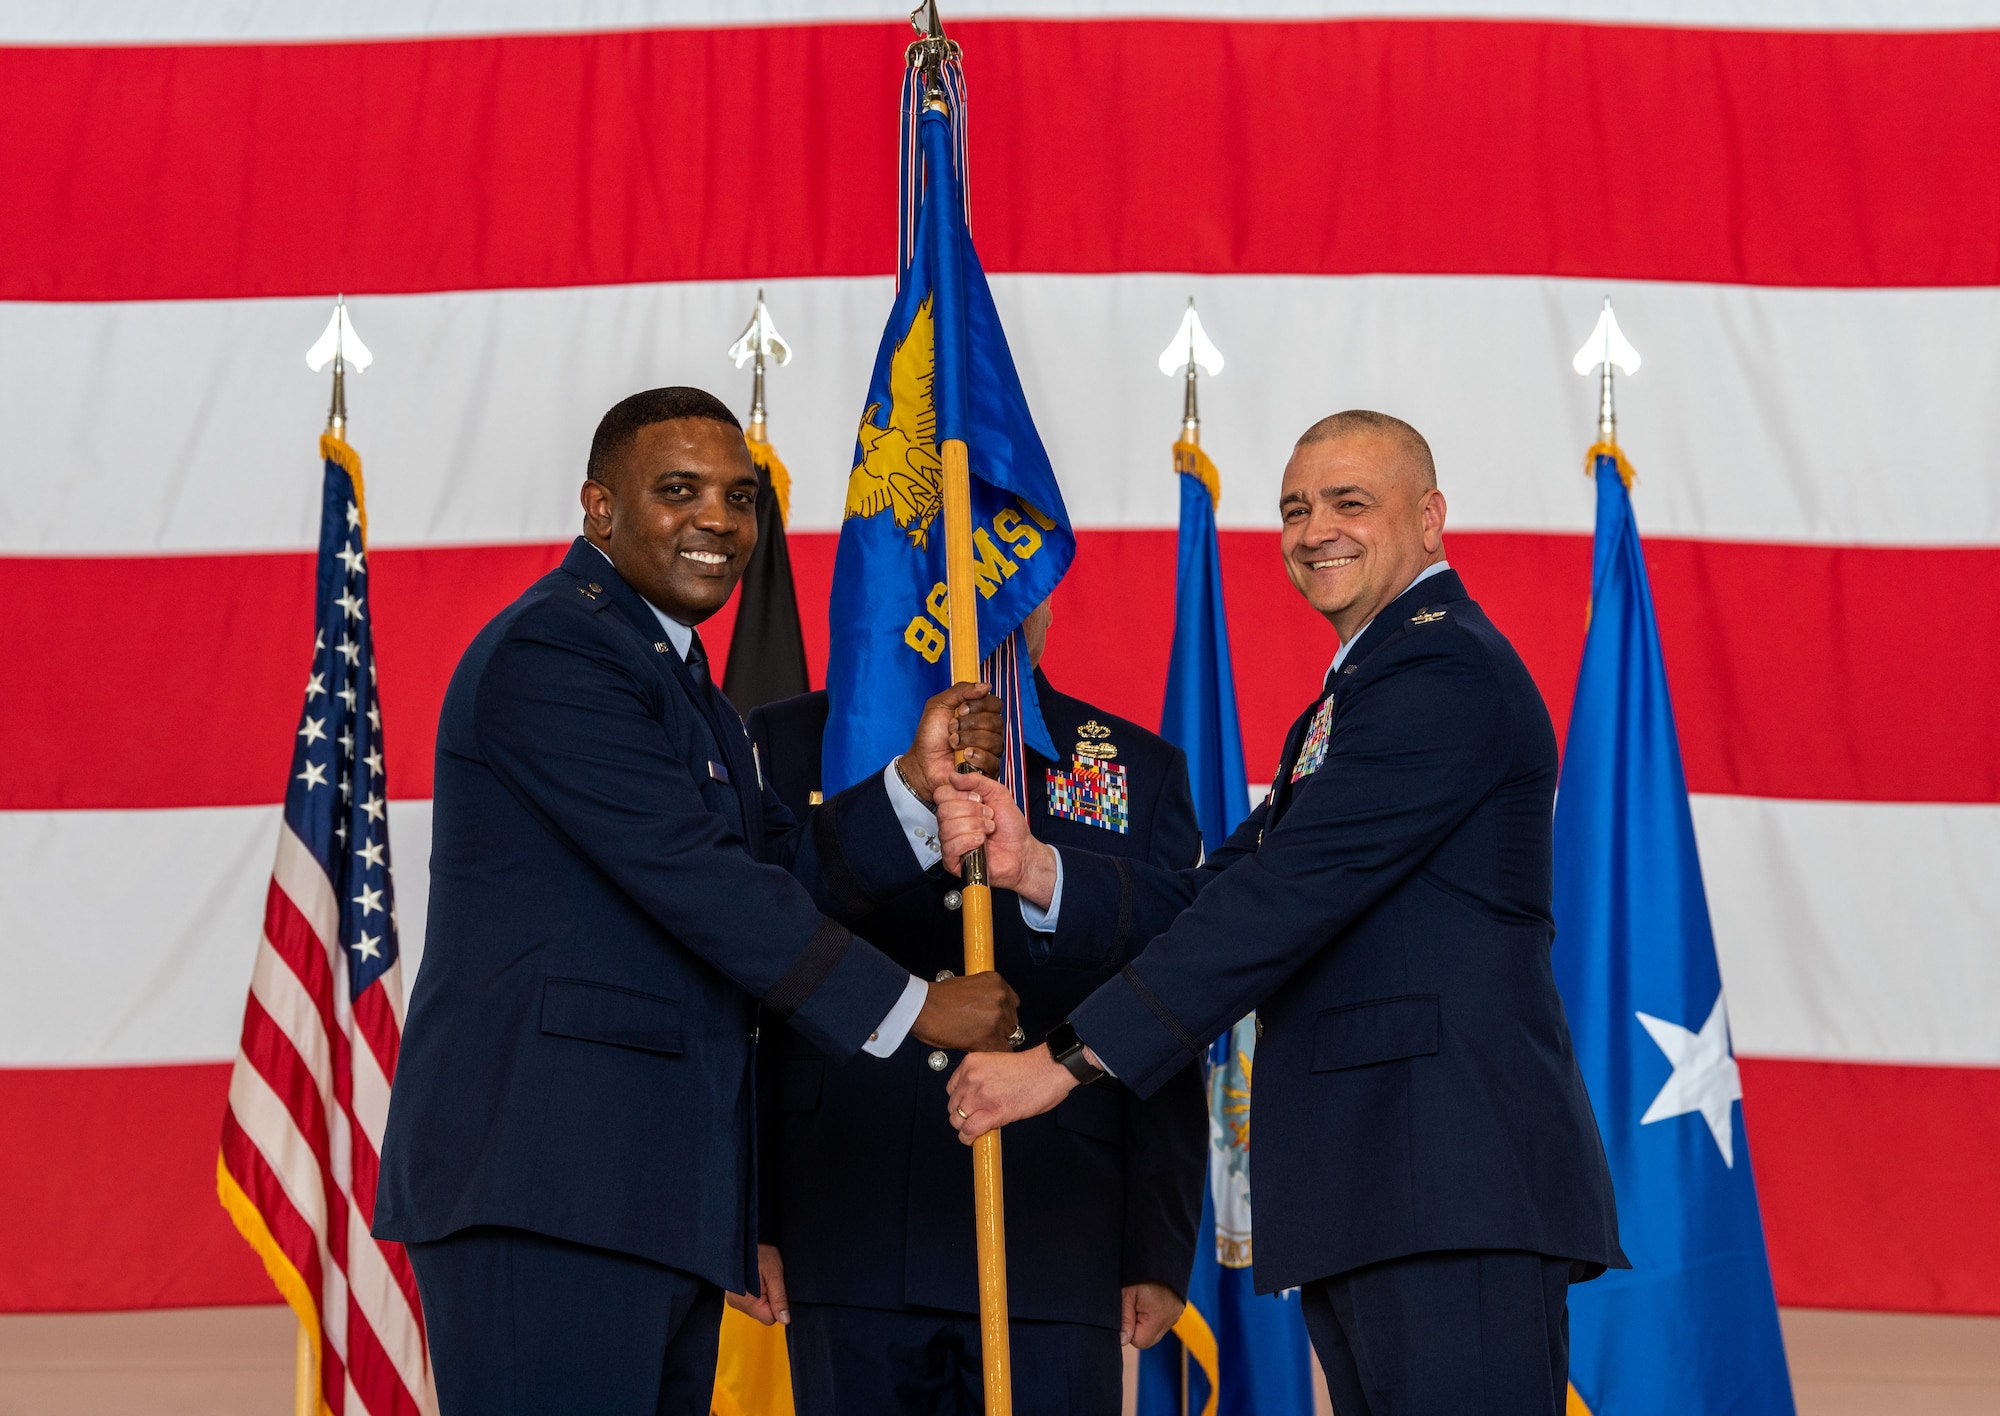 U.S. Air Force Brig. Gen. Otis C. Jones, 86th Airlift Wing commander, presents the guidon to Col. Amy M. Glisson, outgoing 86th Mission Support Group commander, at Ramstein Air Base, Germany, June 9, 2023.